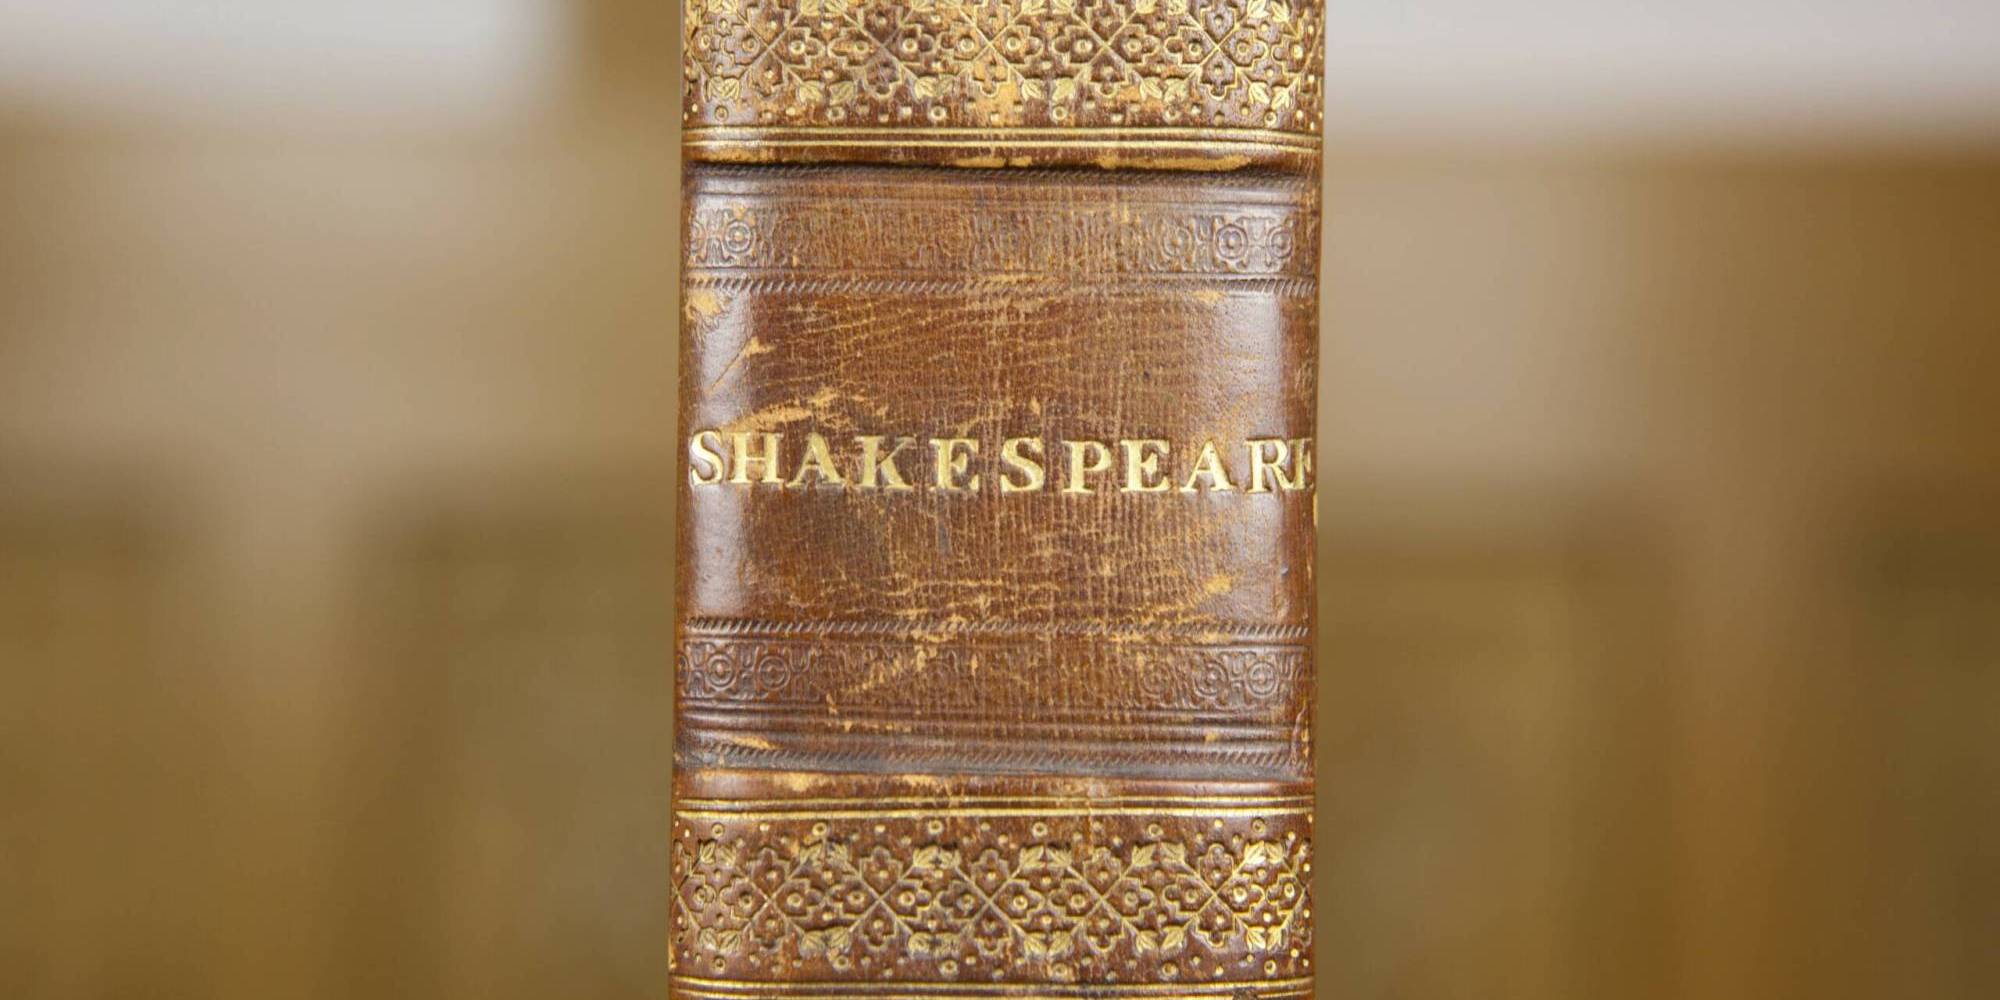 The brown spine of a book shows the word Shakespeare